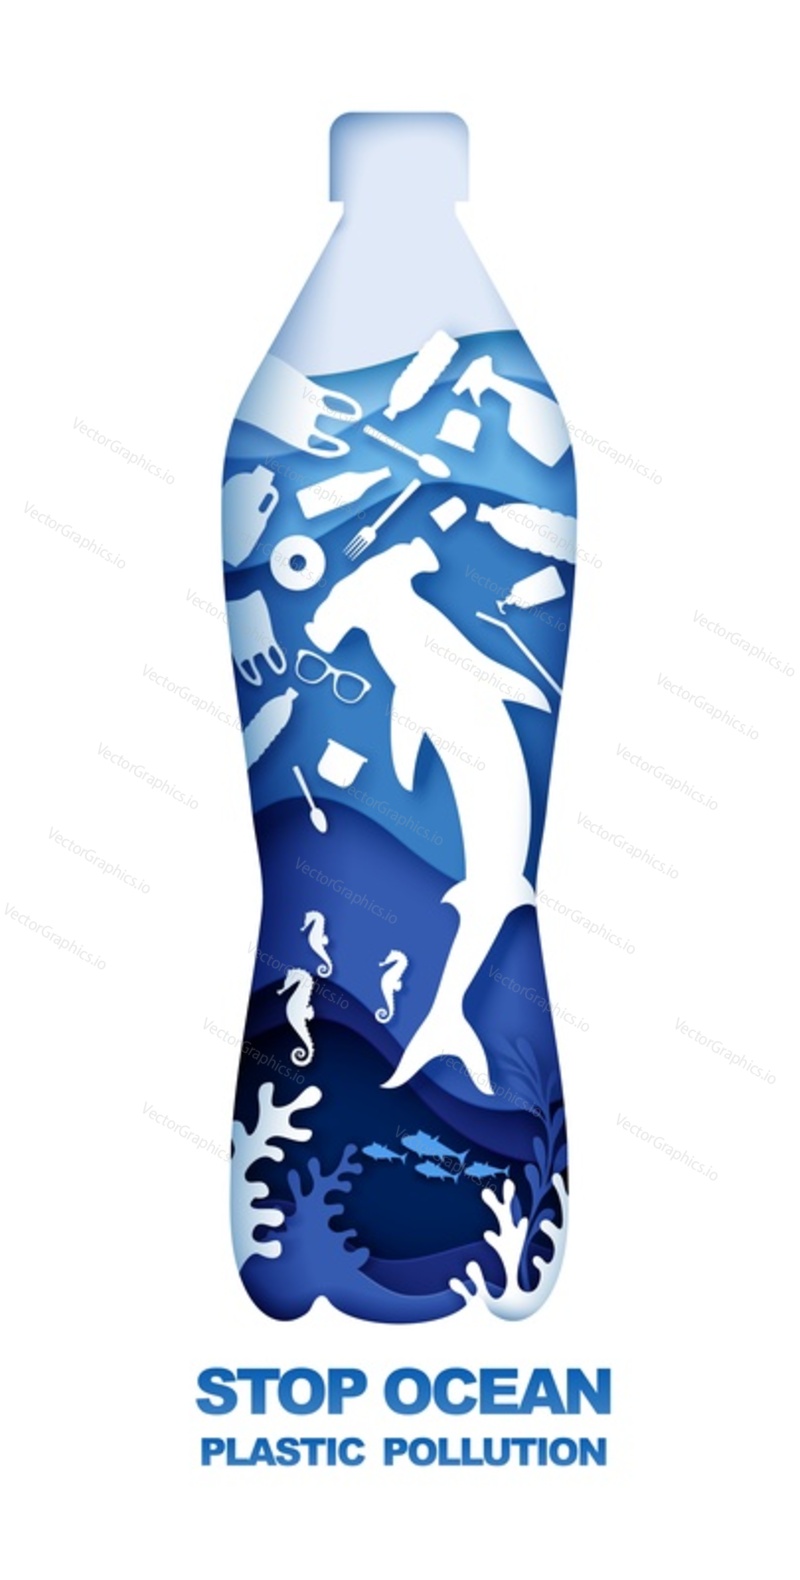 Stop ocean plastic pollution. Vector illustration in paper art style. Water bottle with marine animals and plastic trash inside. Ocean environmental problem, ecology, save planet Earth.